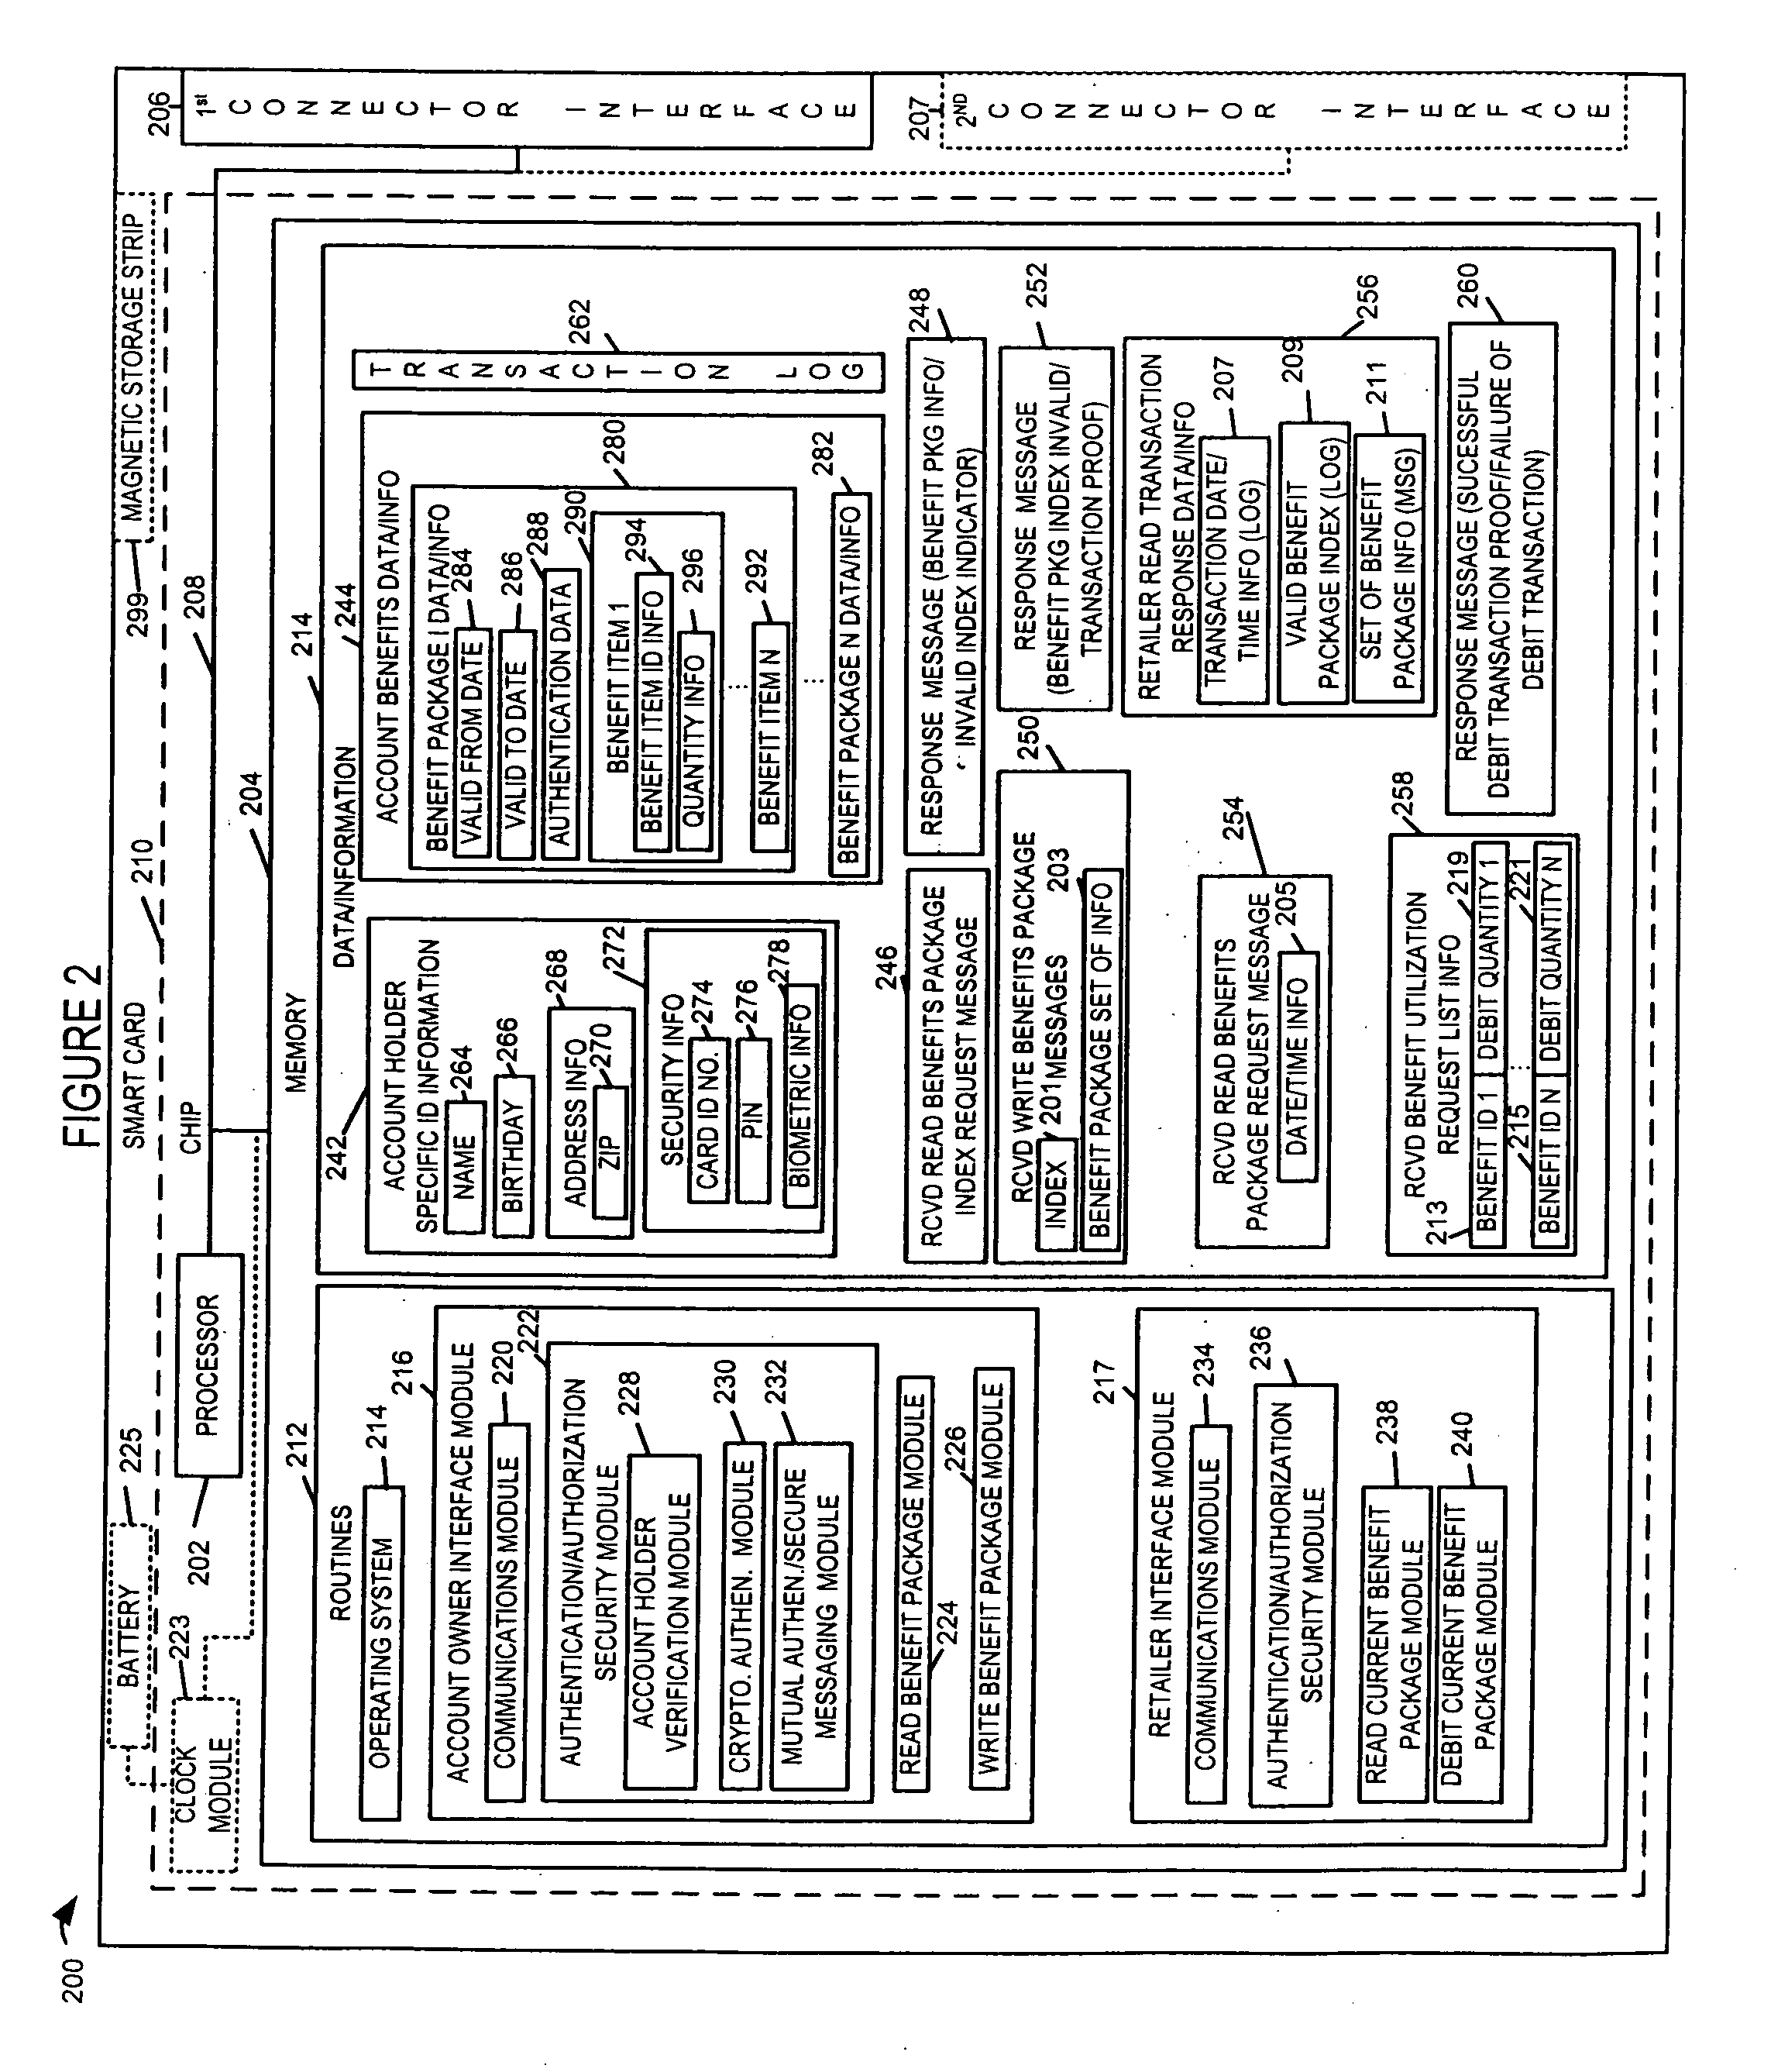 Method and apparatus for performing benefit transactions using a portable intergrated circuit device